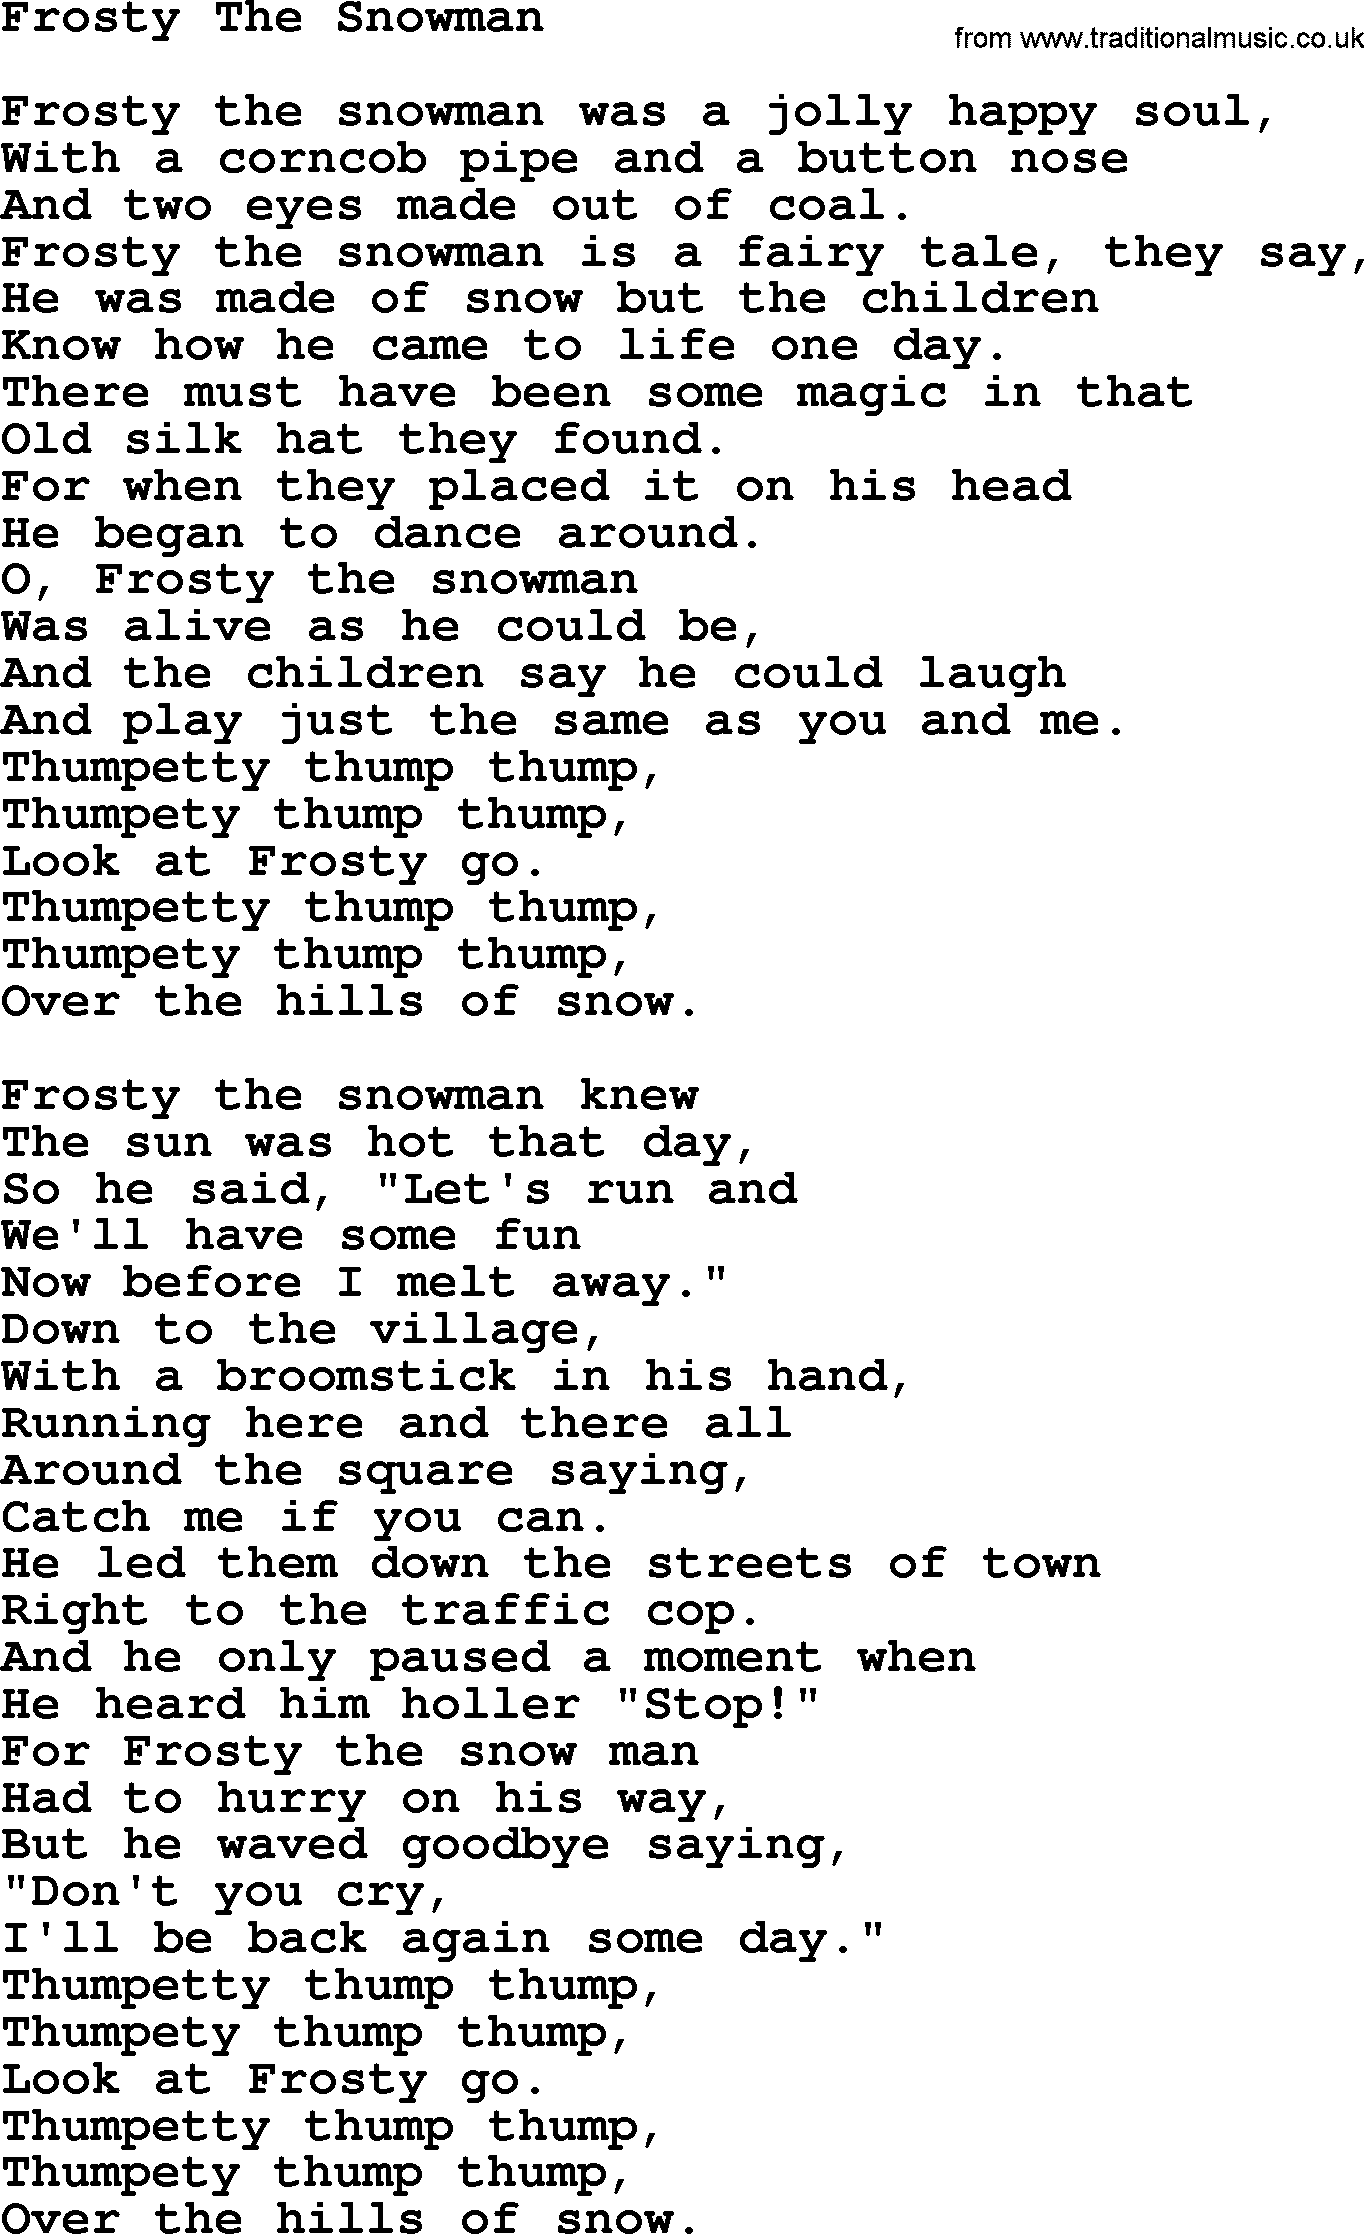 Willie Nelson song: Frosty The Snowman lyrics